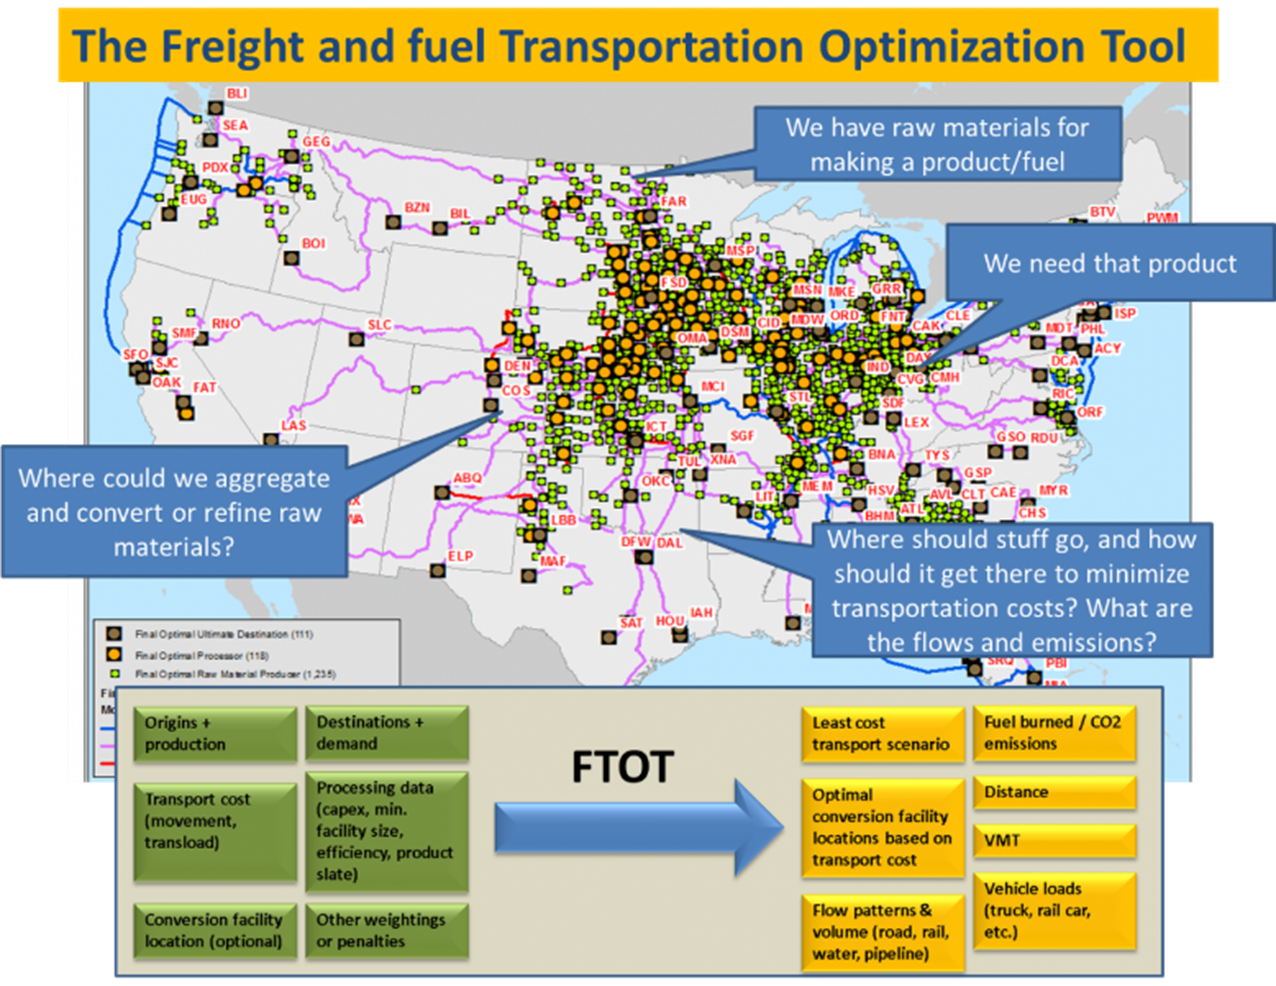 U.S. DOT Volpe Center Tool Evaluates Freight and Fuel Transport Options. 